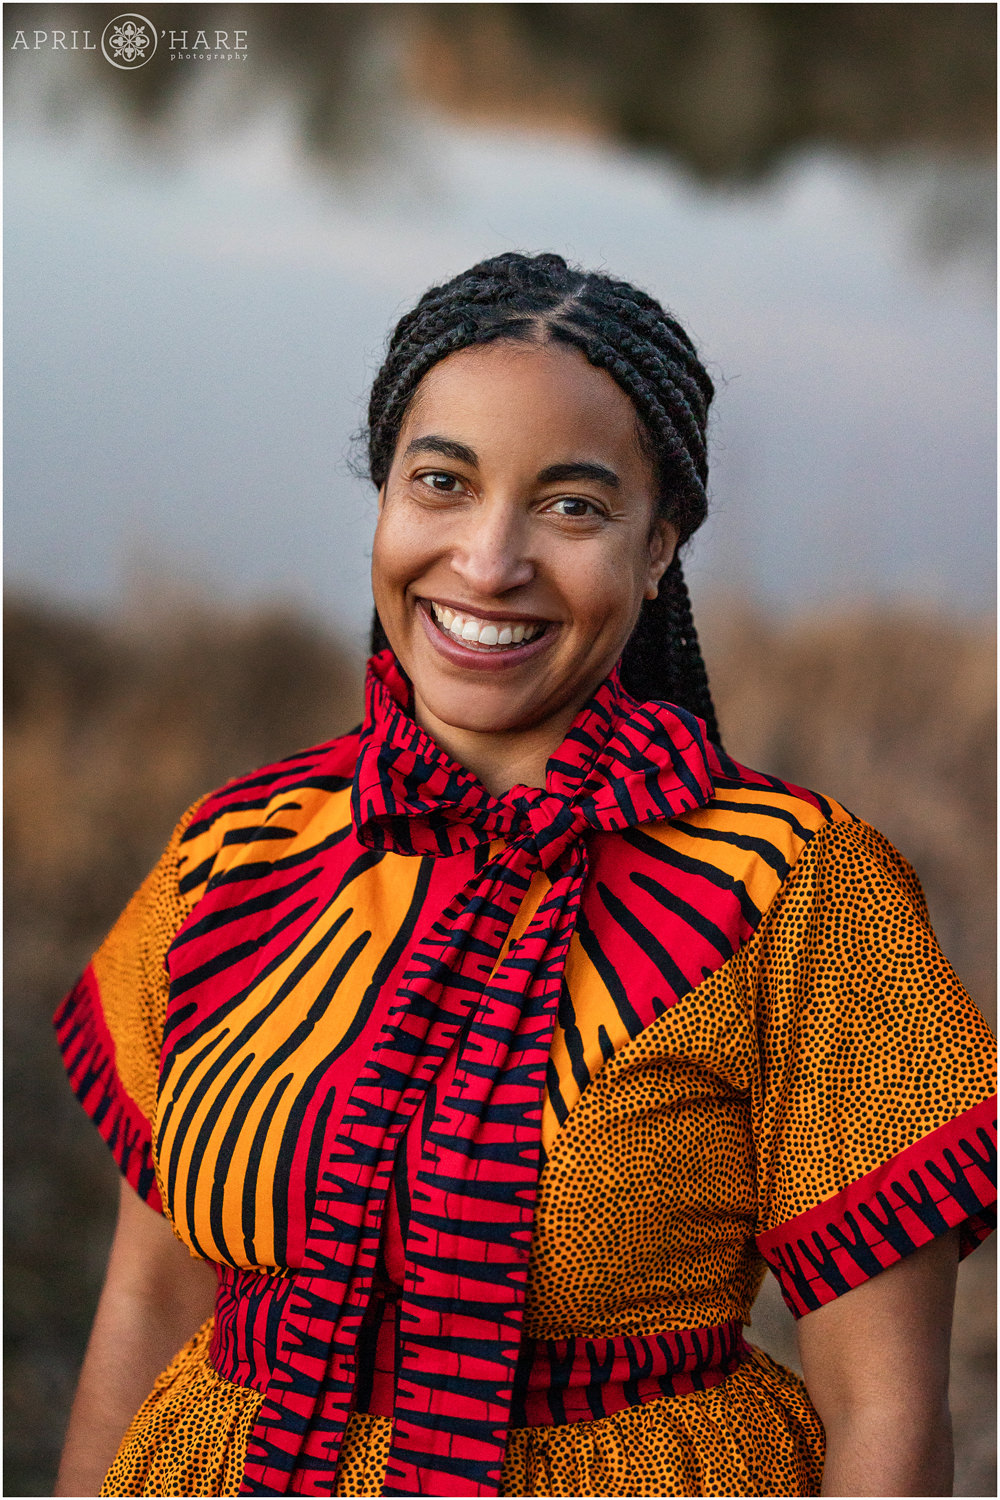 Beautiful woman with braids in her hair wearing a printed orange and red dress with short sleeves poses for a headshot photo in front of Viele Lake at Sunset in Boulder Colorado